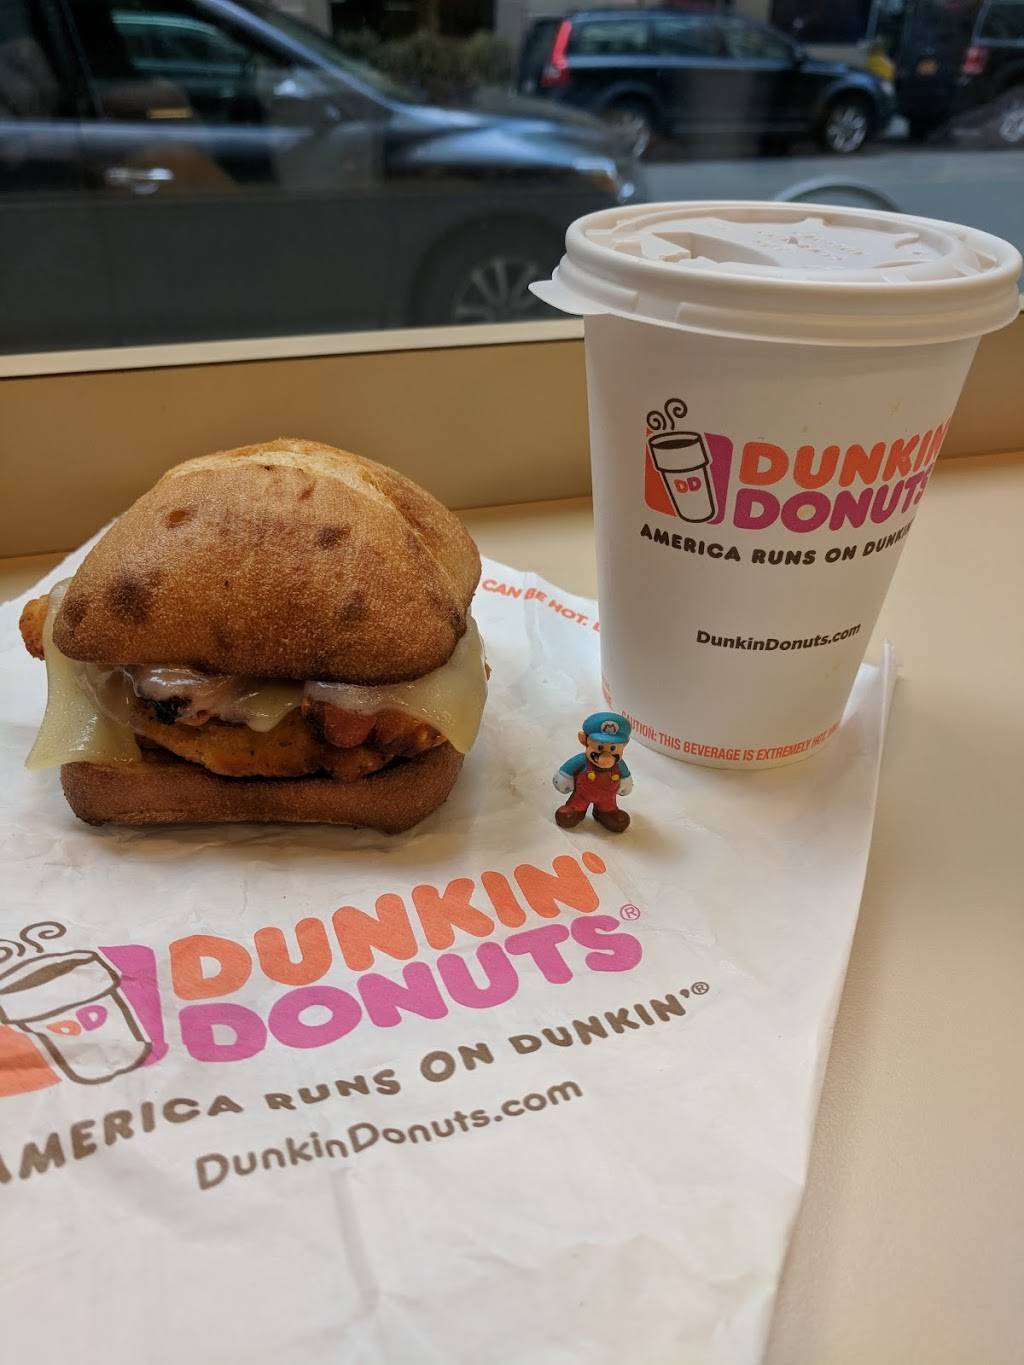 Dunkin Donuts | cafe | 90 Broad St, New York, NY 10004, USA | 2124227991 OR +1 212-422-7991